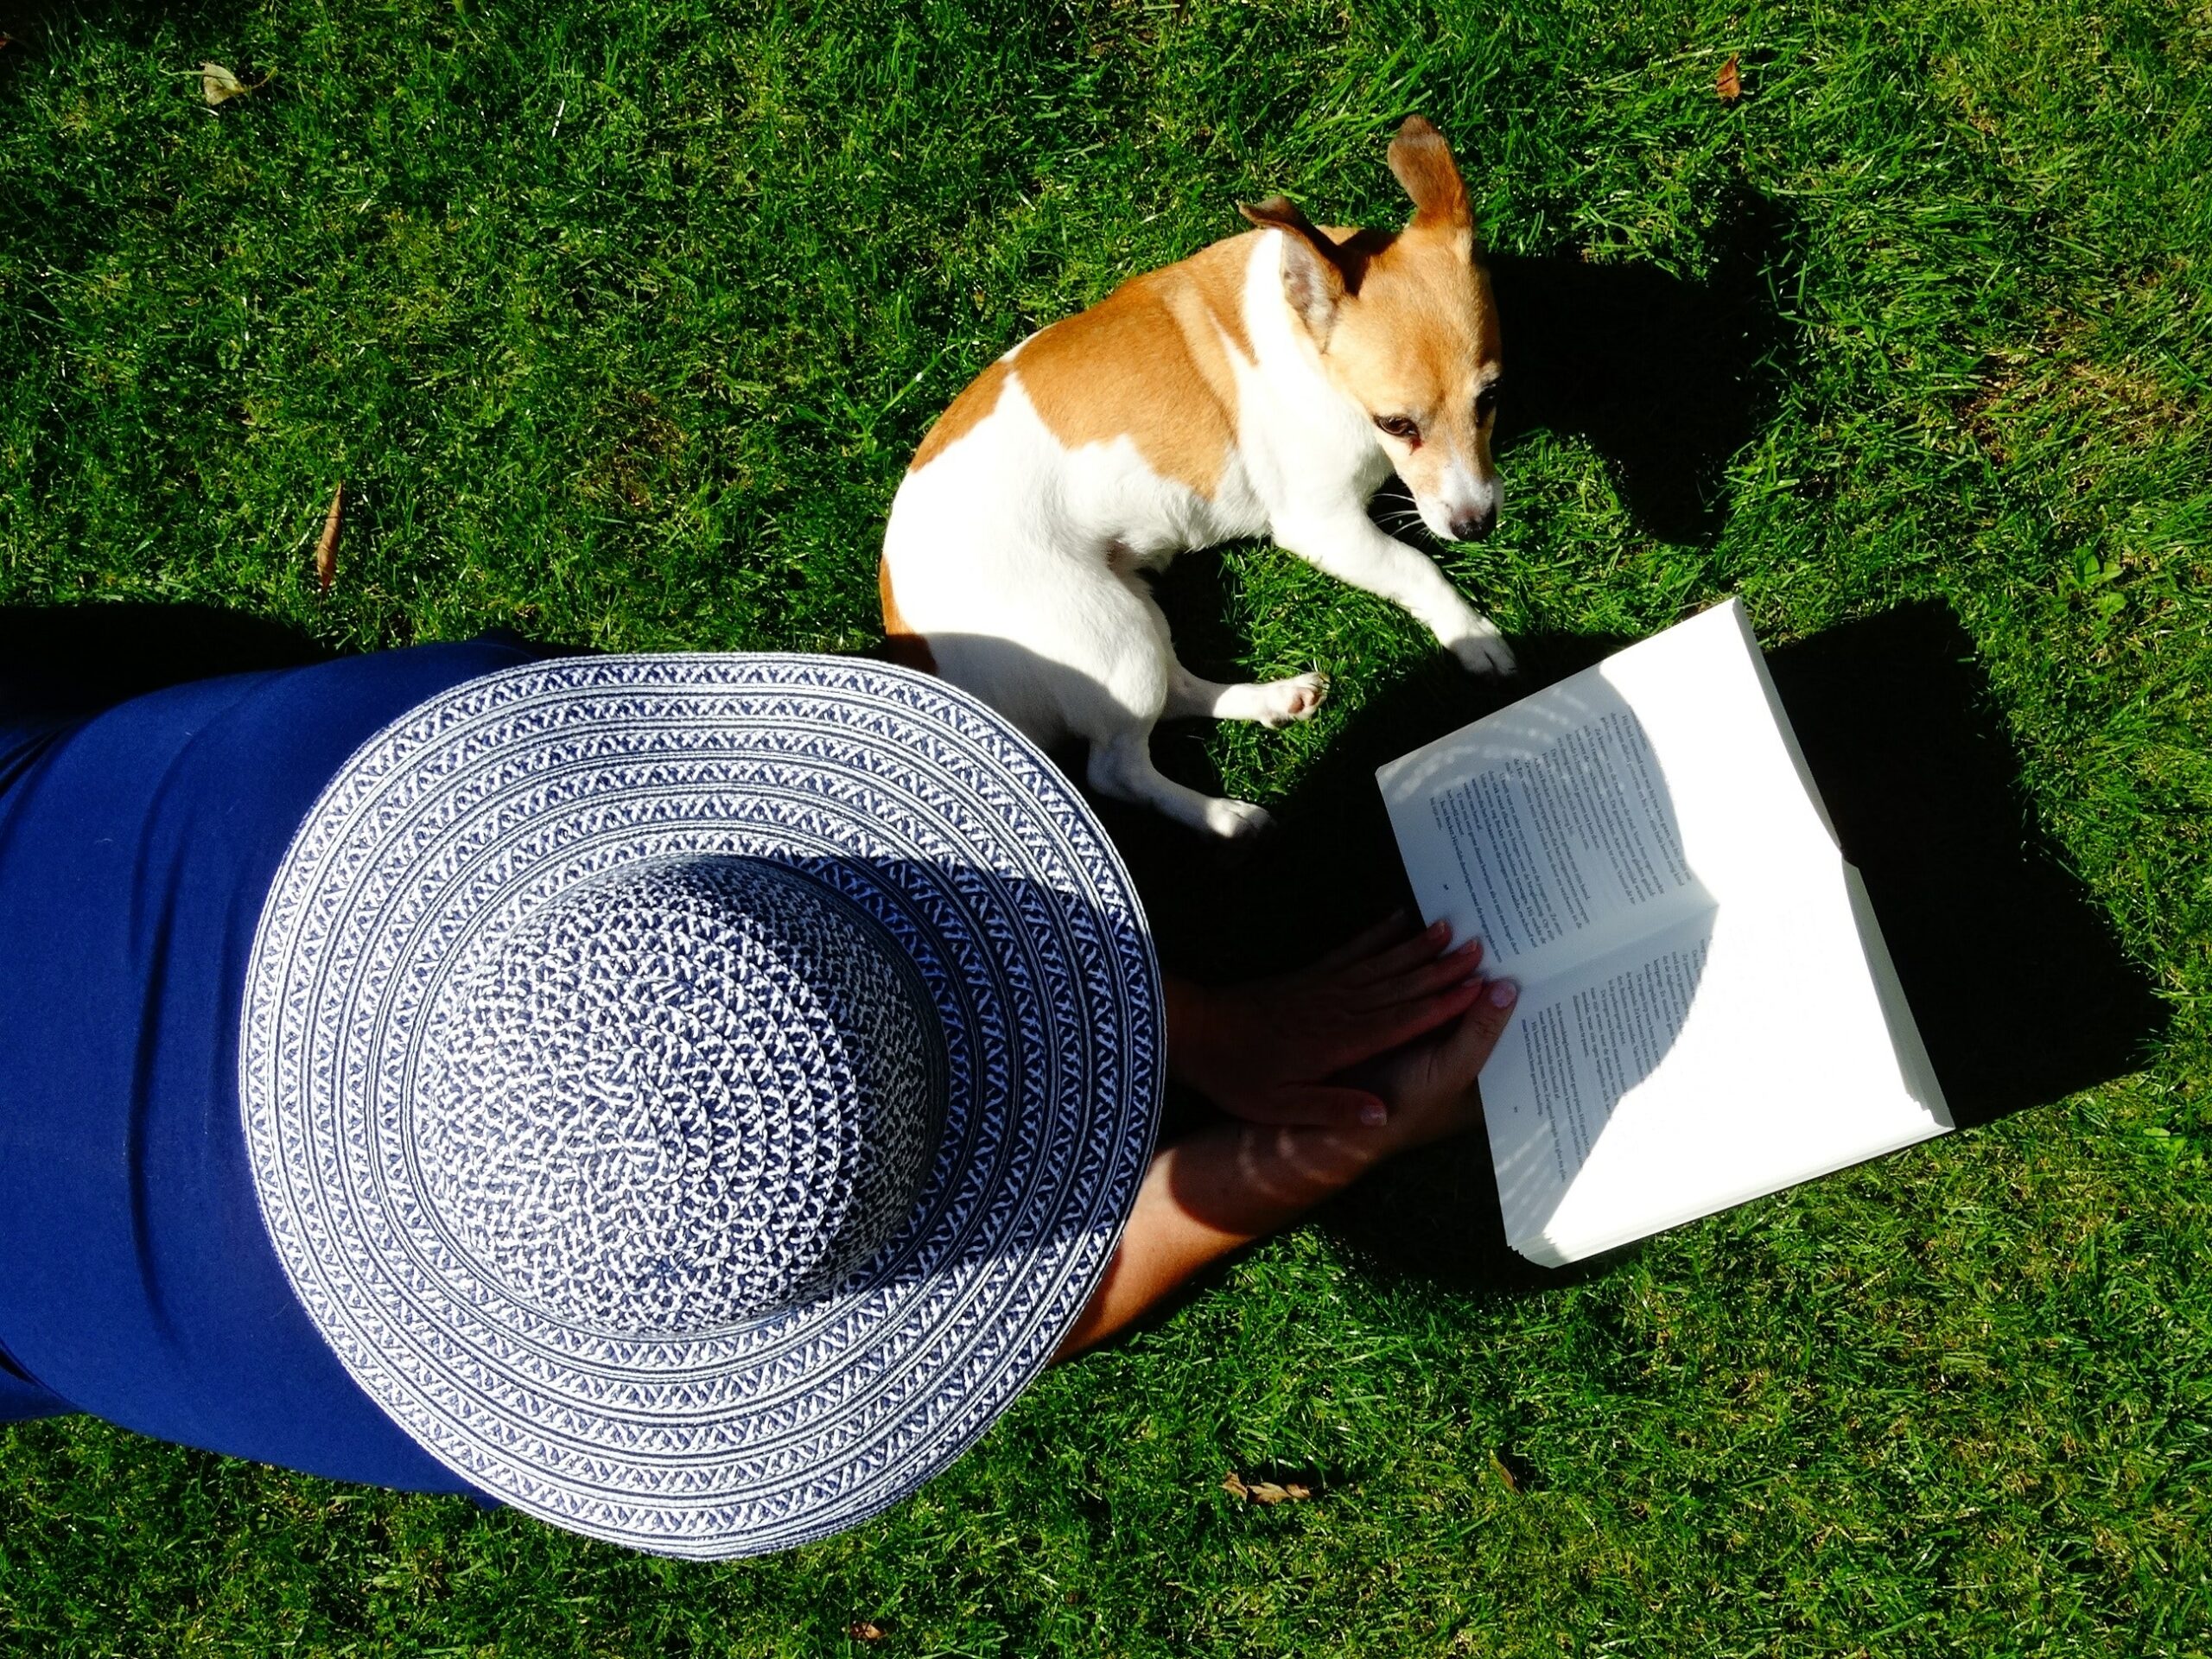 reading in the sun with a dog and sunhat